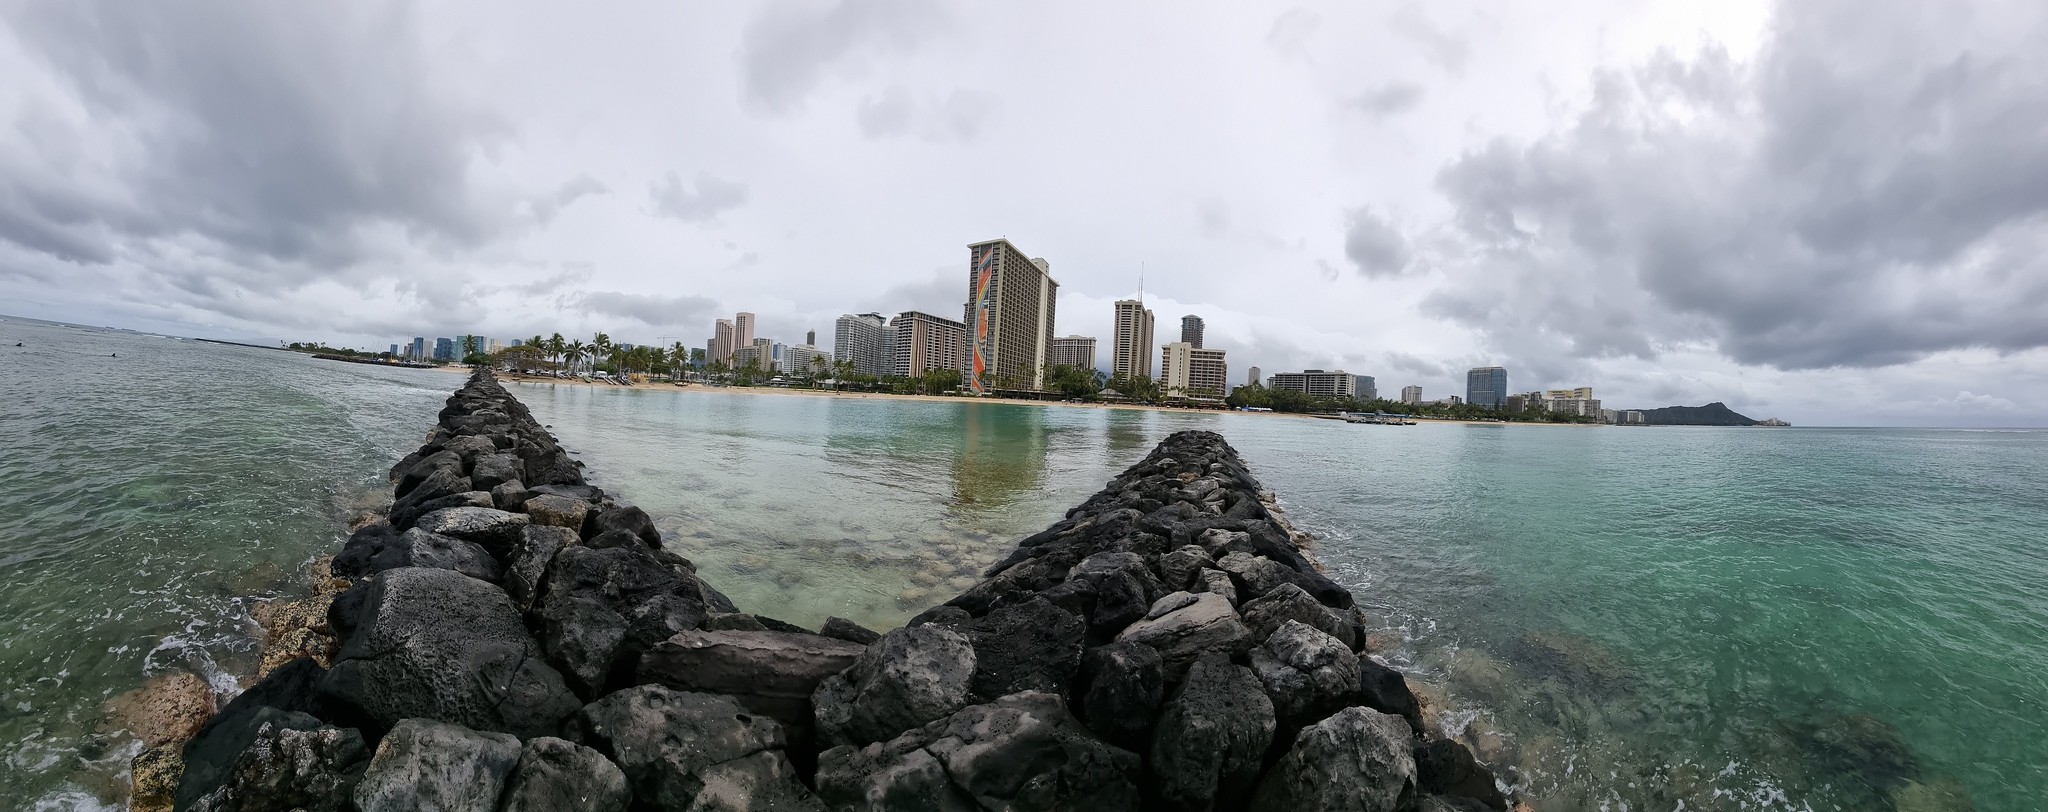 A panorama looking back at the Hilton Hawaiian Village and the Rainbow Tower